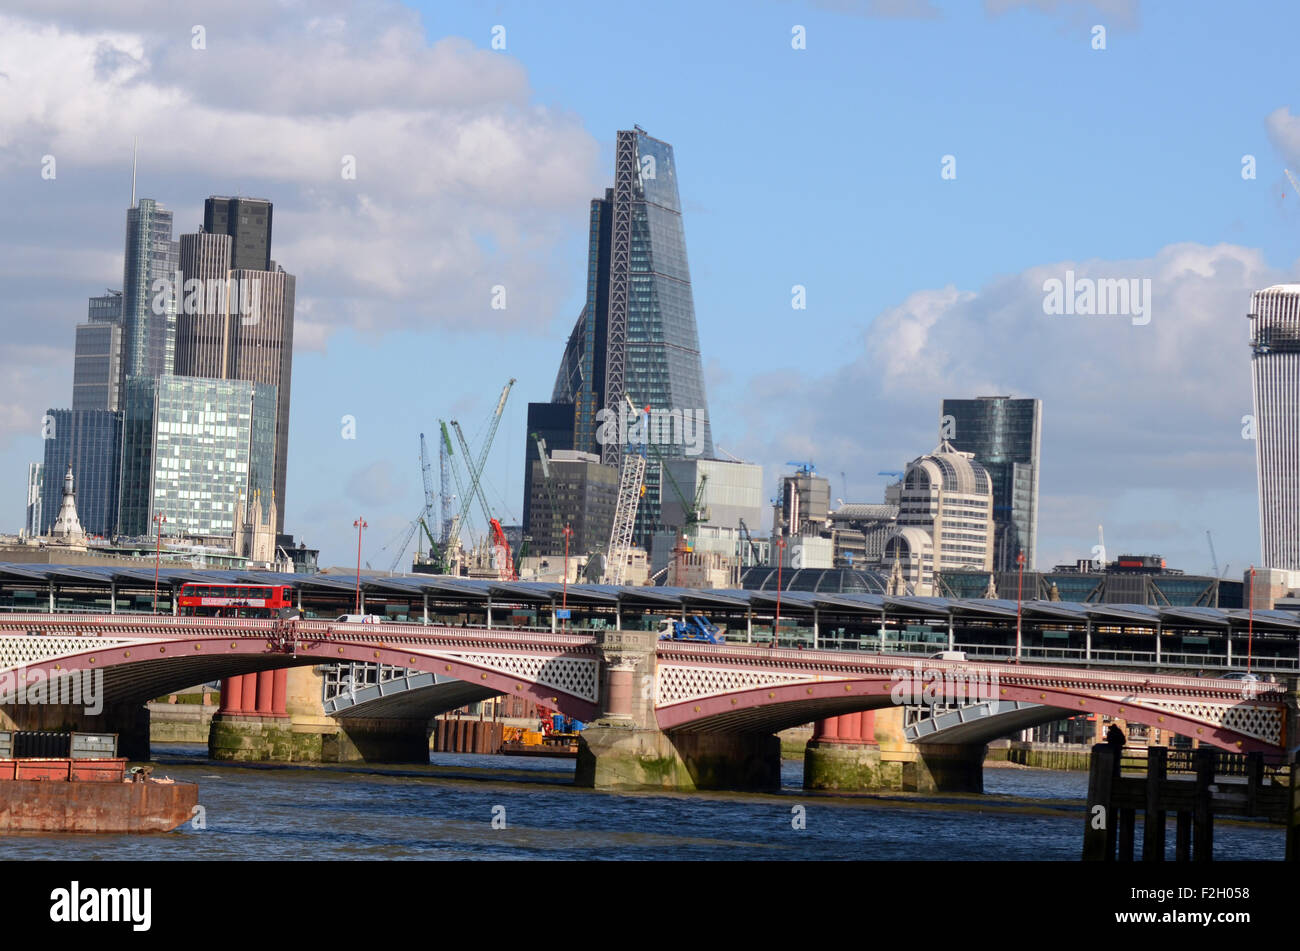 London, UK, 21/02/2014, The Cheese grater building behind Blackfriars Bridge. View of the Thames on a sunny day. Stock Photo